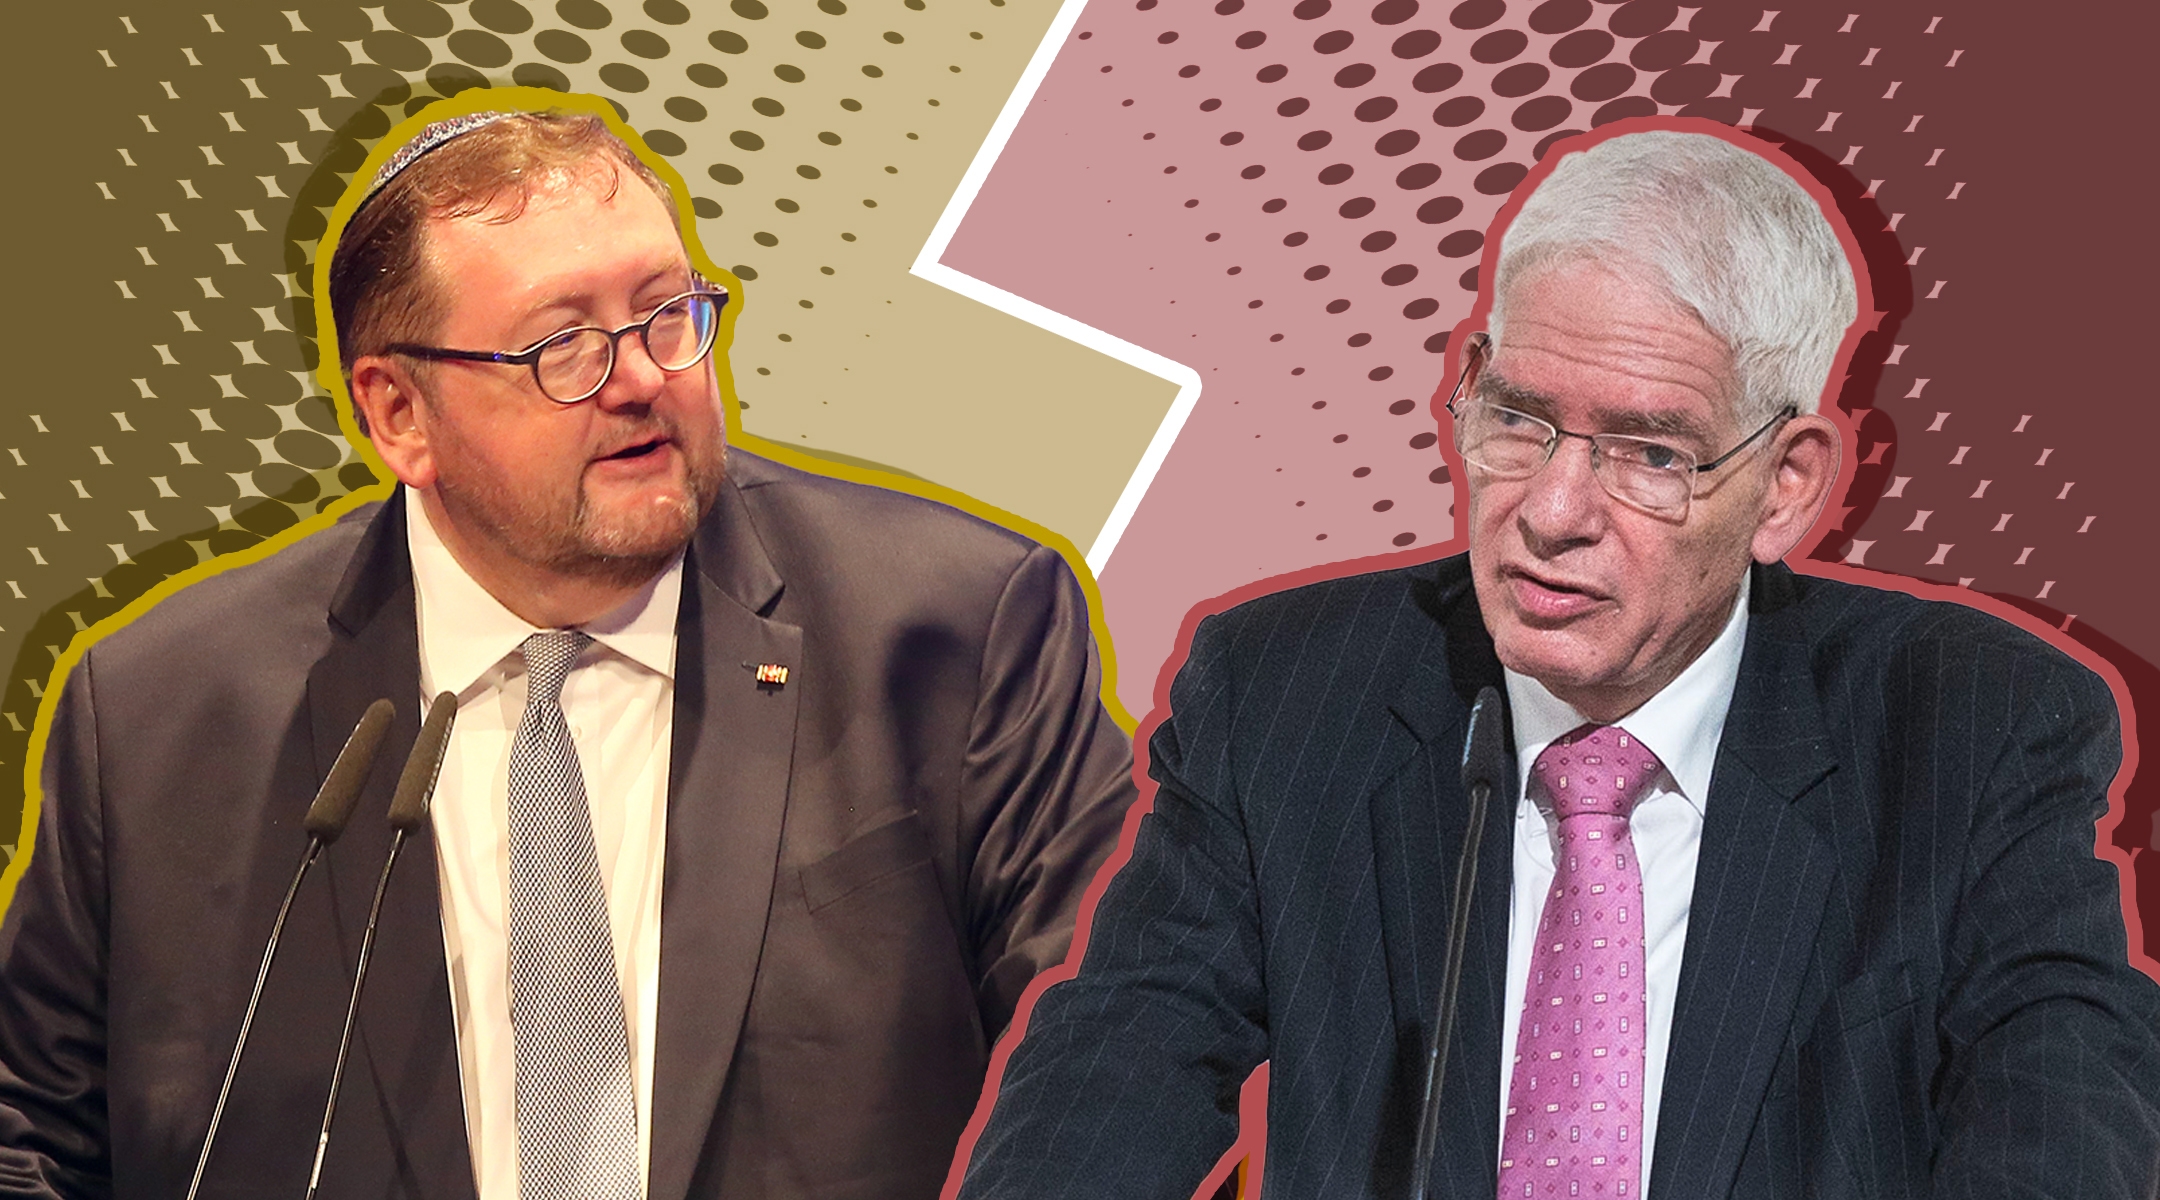 Rabbi Walter Homolka, left, and Josef Schuster, head of the Central Council of Jews in Germany, are on opposite sides of a deepening fight within Germany’s Jewish infrastructure. (Collage by Mollie Suss)